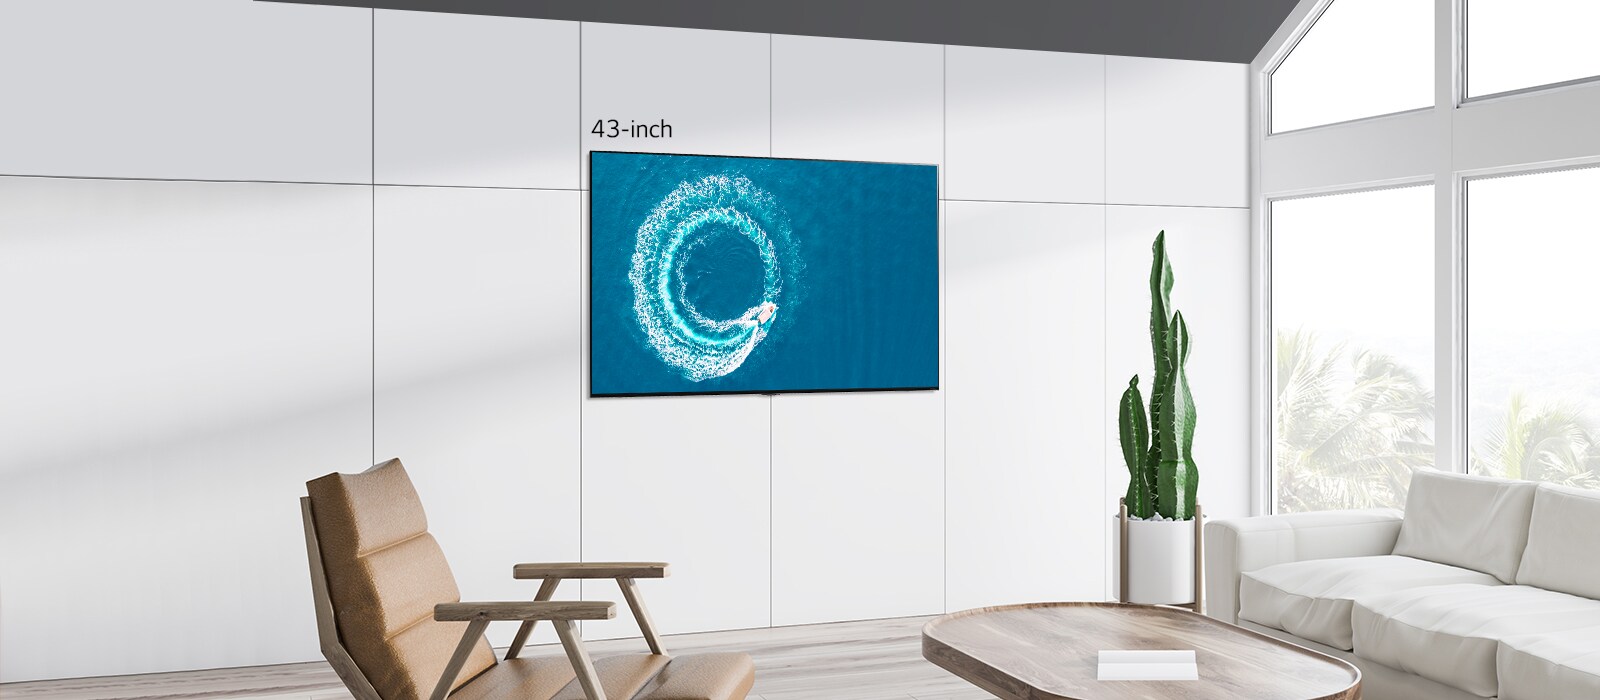 LG QNED MiniLED TV wall mounted in a modern, white space. Scrolling left-right shows the difference in size between a 43-inch and 86-inch screen.